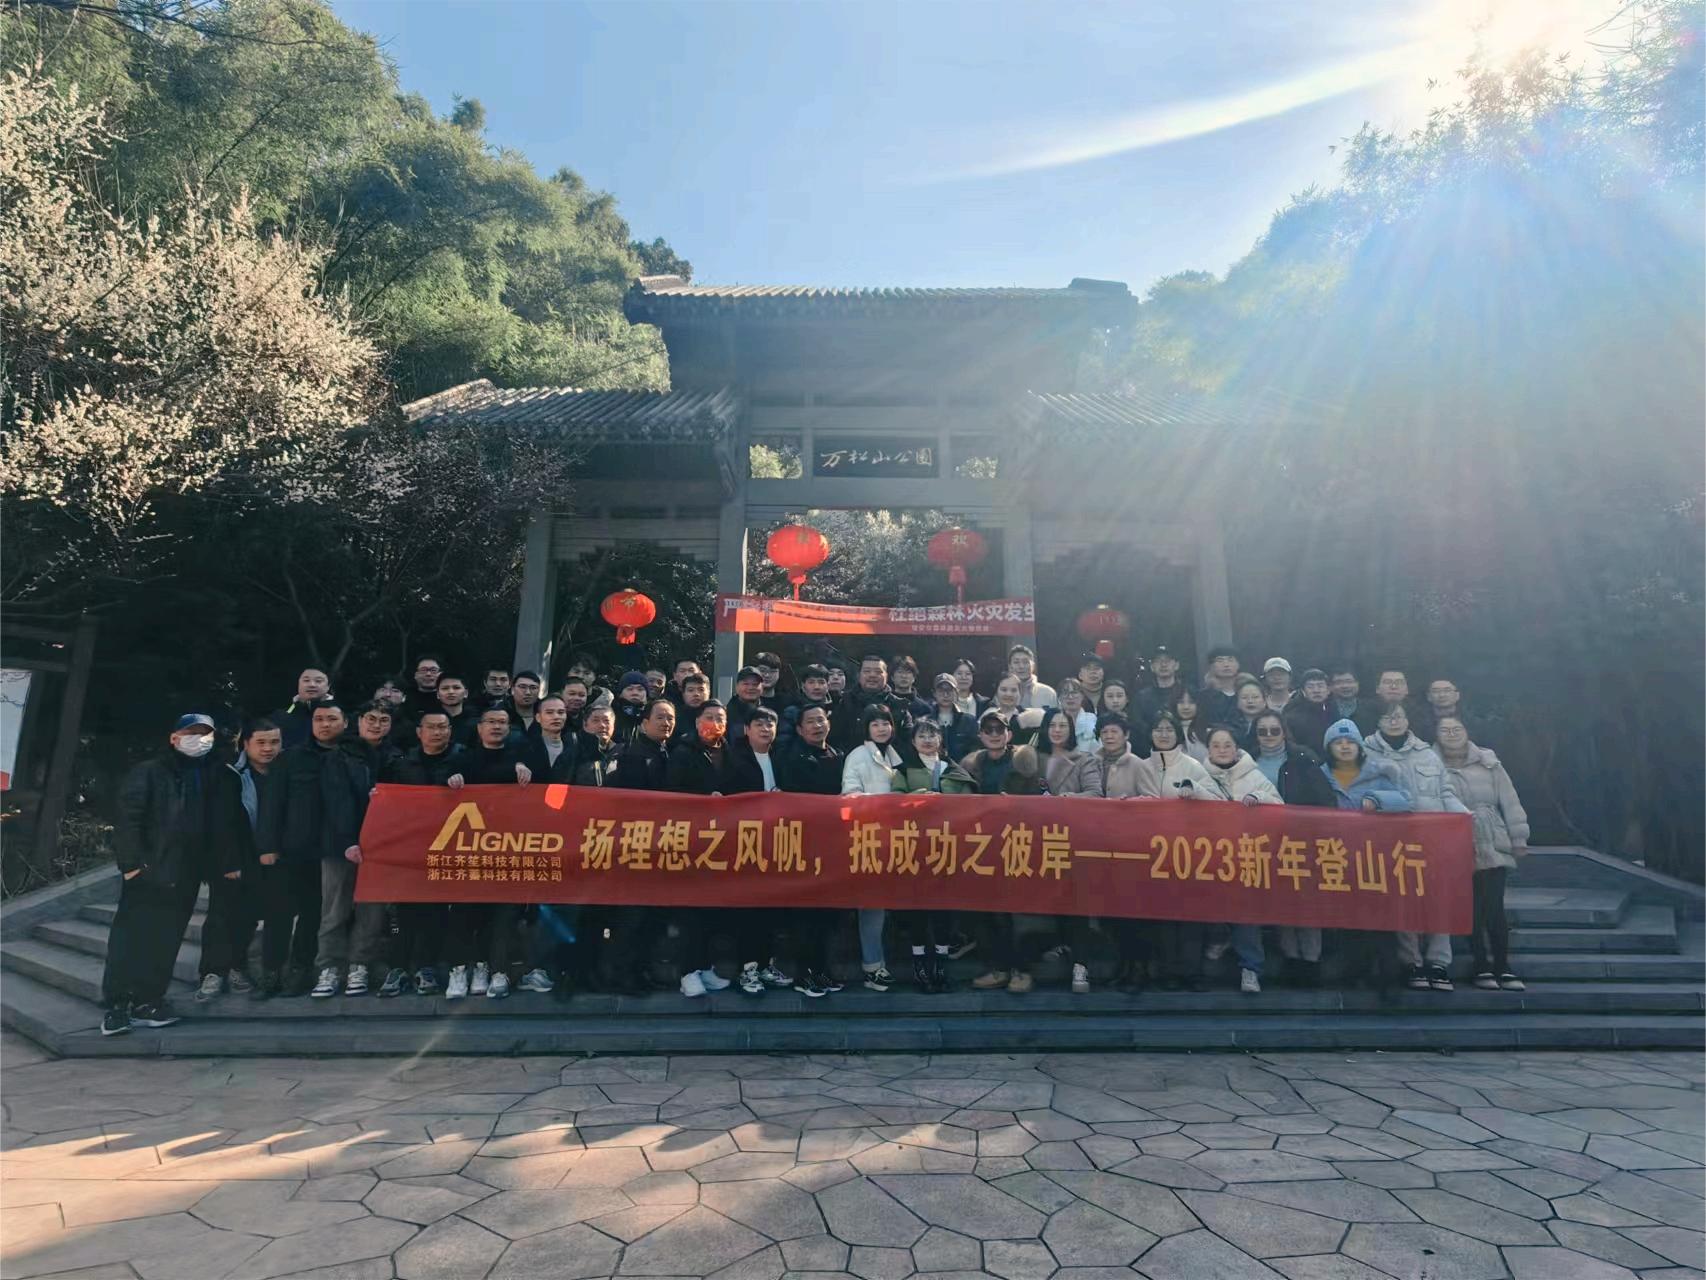 The aligned team held a New Year's mountain climbing event